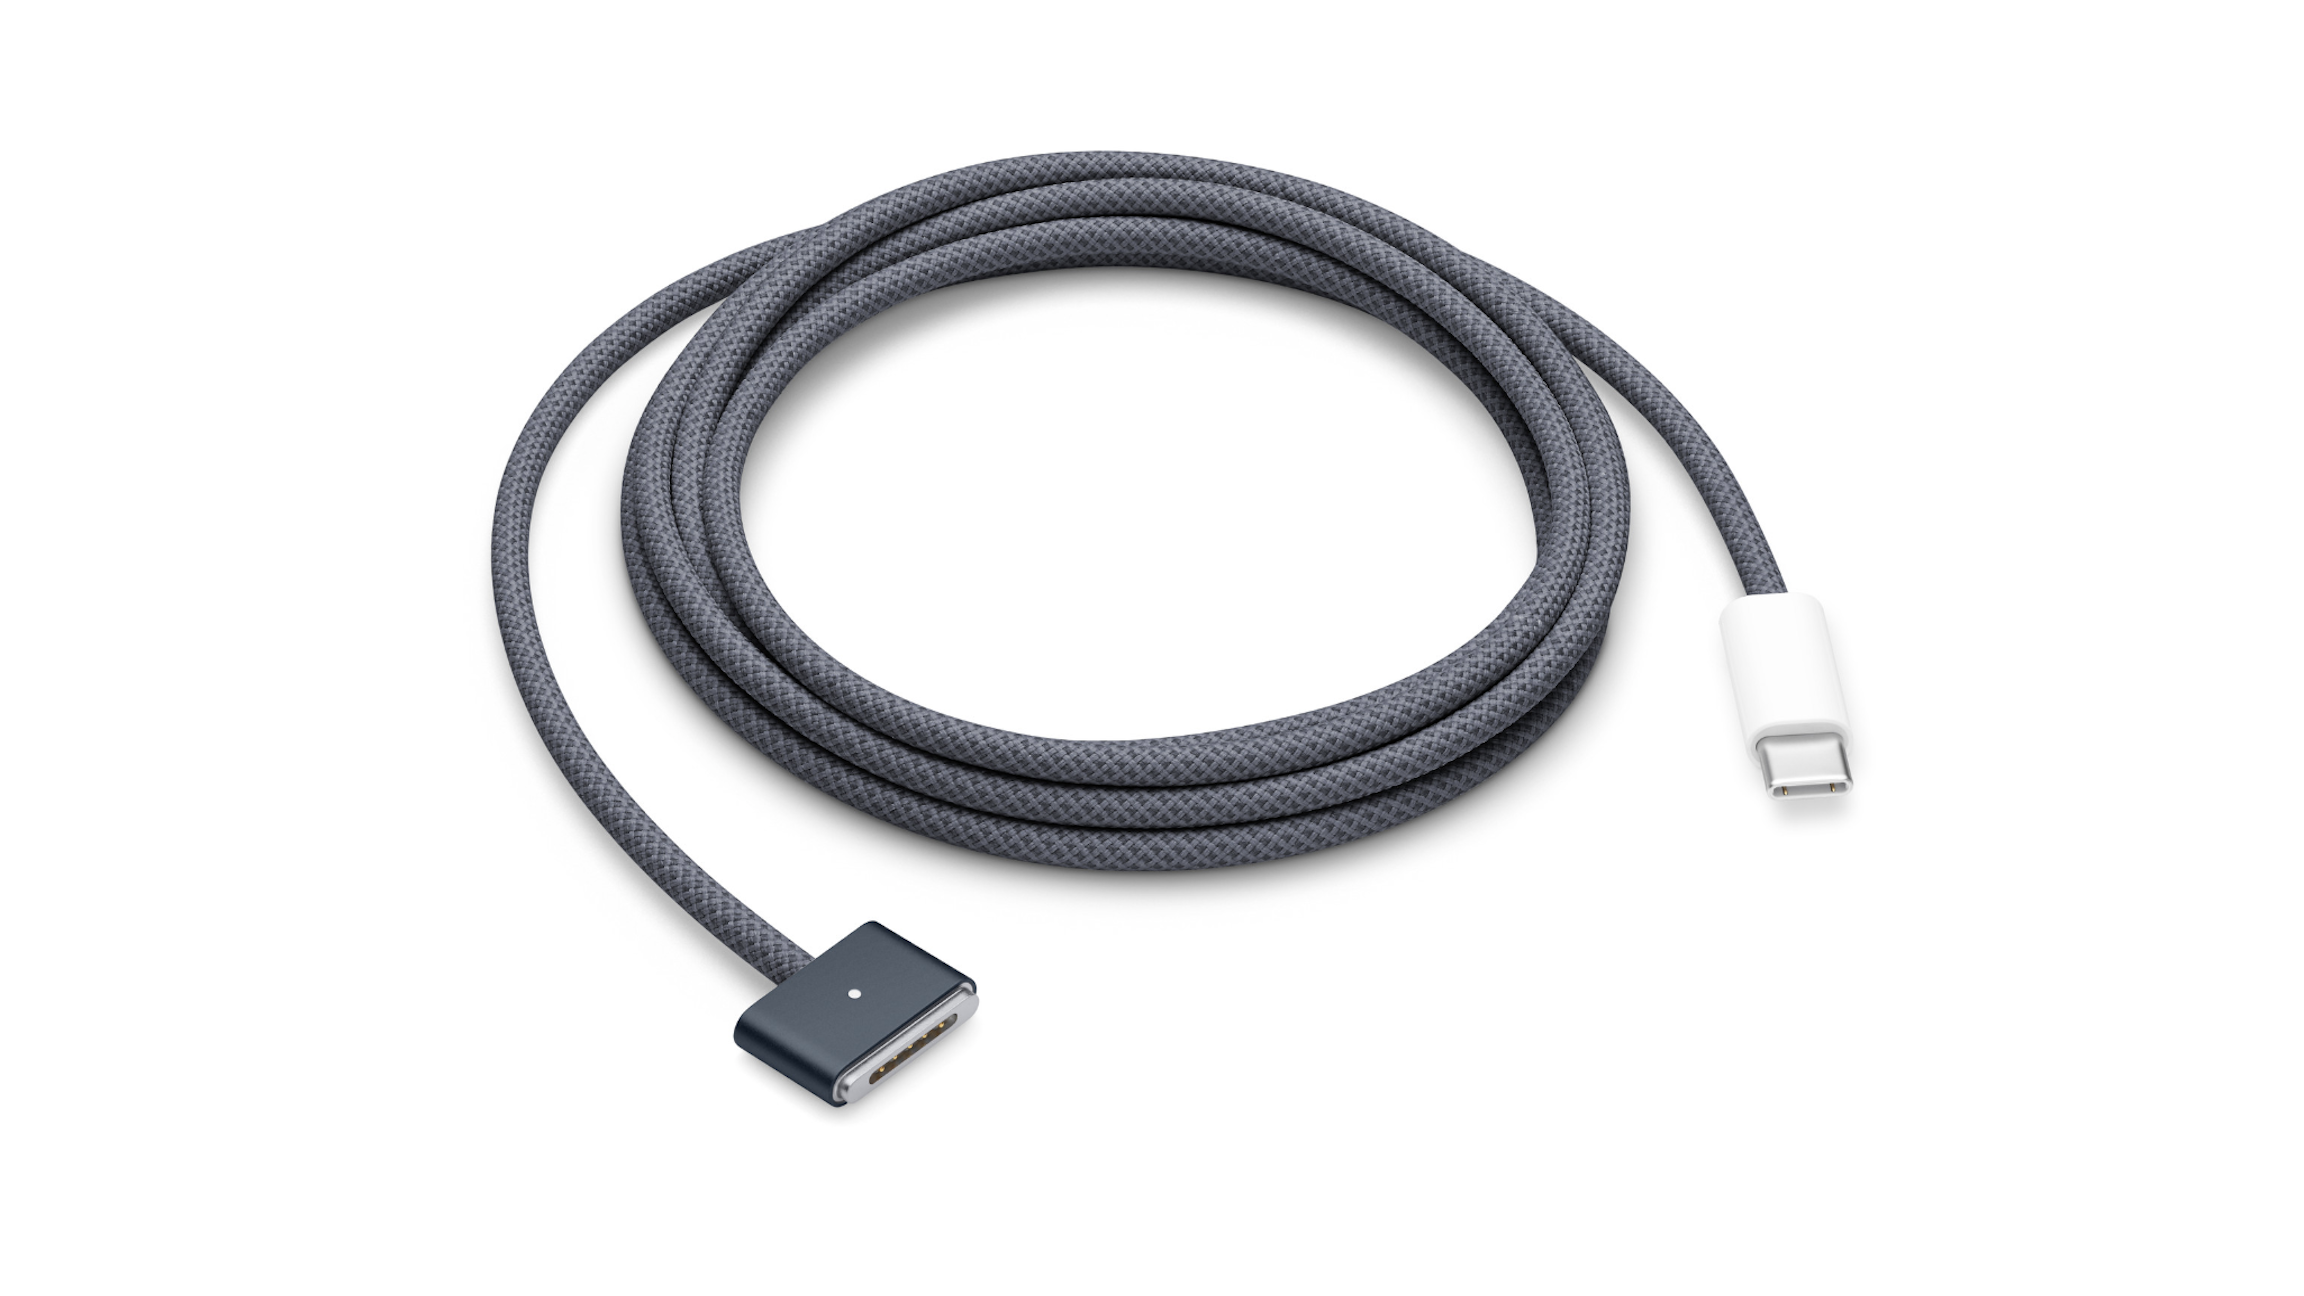 Apple USB-C to MagSafe 3 Cable (2 m)